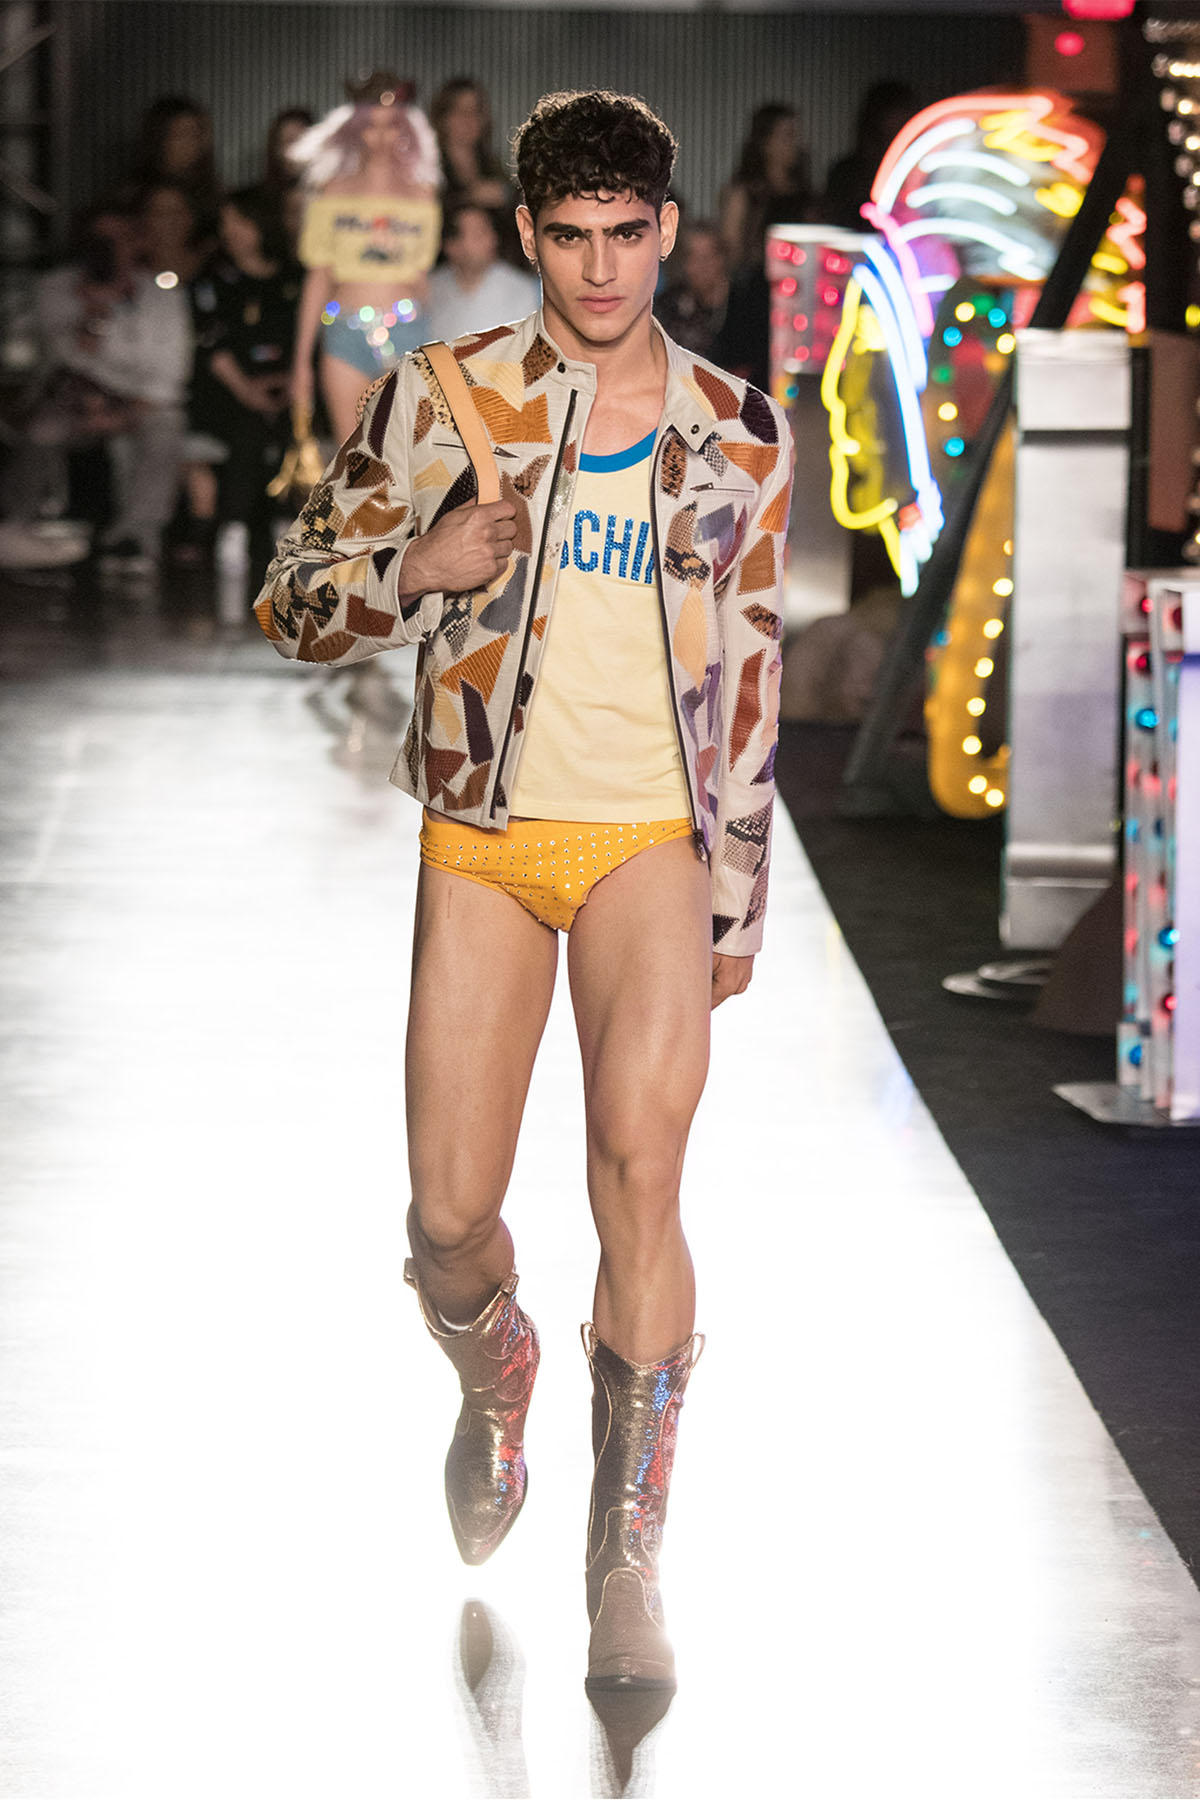 Moschino Spring/Summer 18 Menswear And Women's Resort Collection - Runway